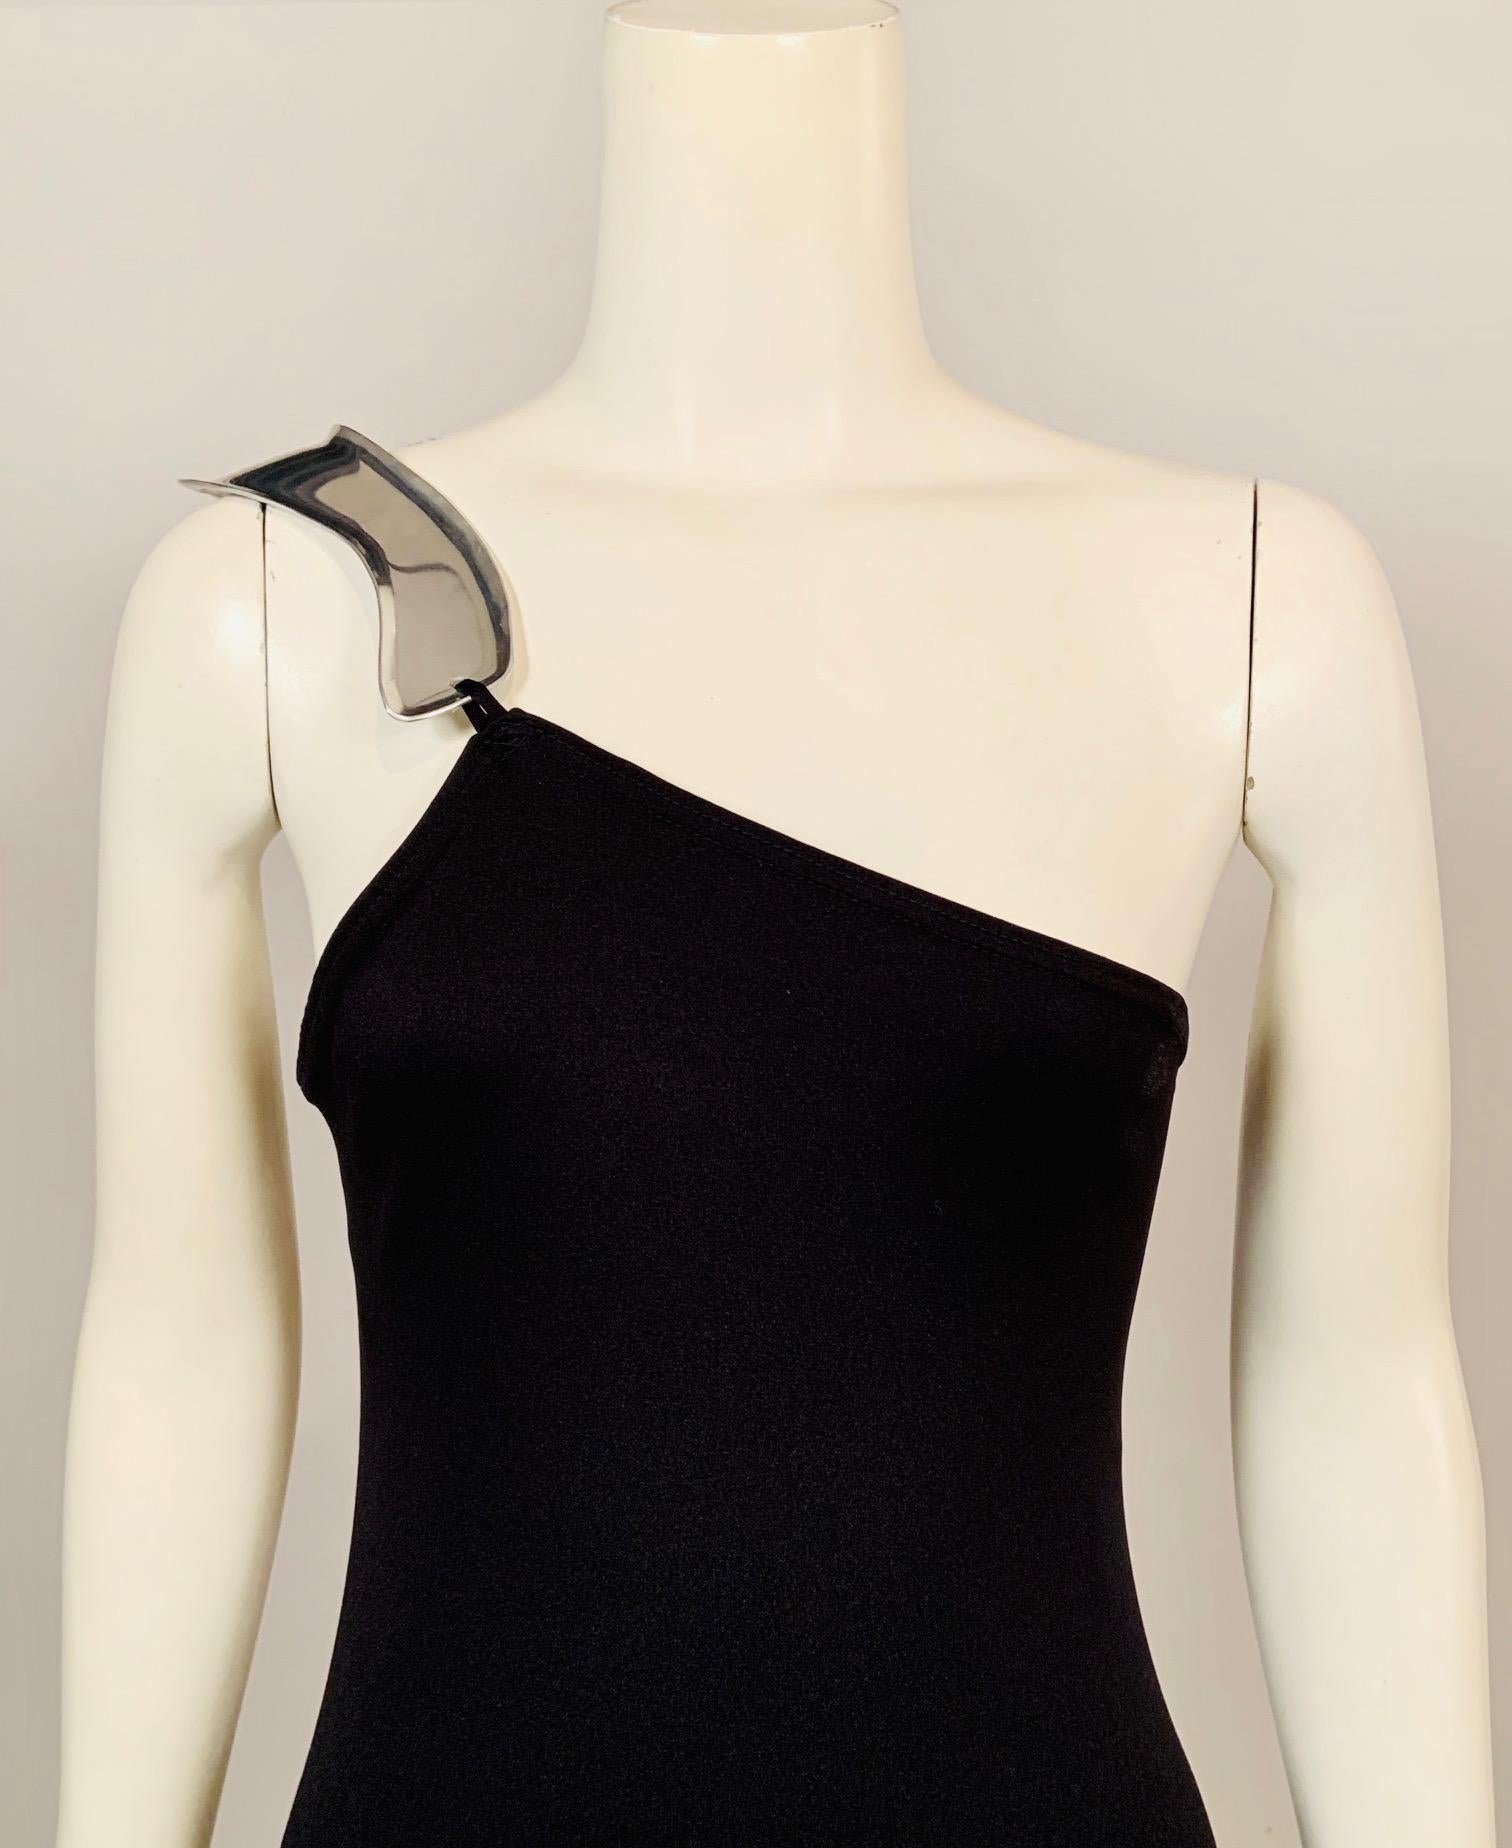 A collaboration between famed clothing designer Rudi Gernreich and jeweler Chris den Blaker resulted in a small group of evening dresses with attached aluminum jewelry. This matte black dress from the mid 1970's is a black crepe dress with one